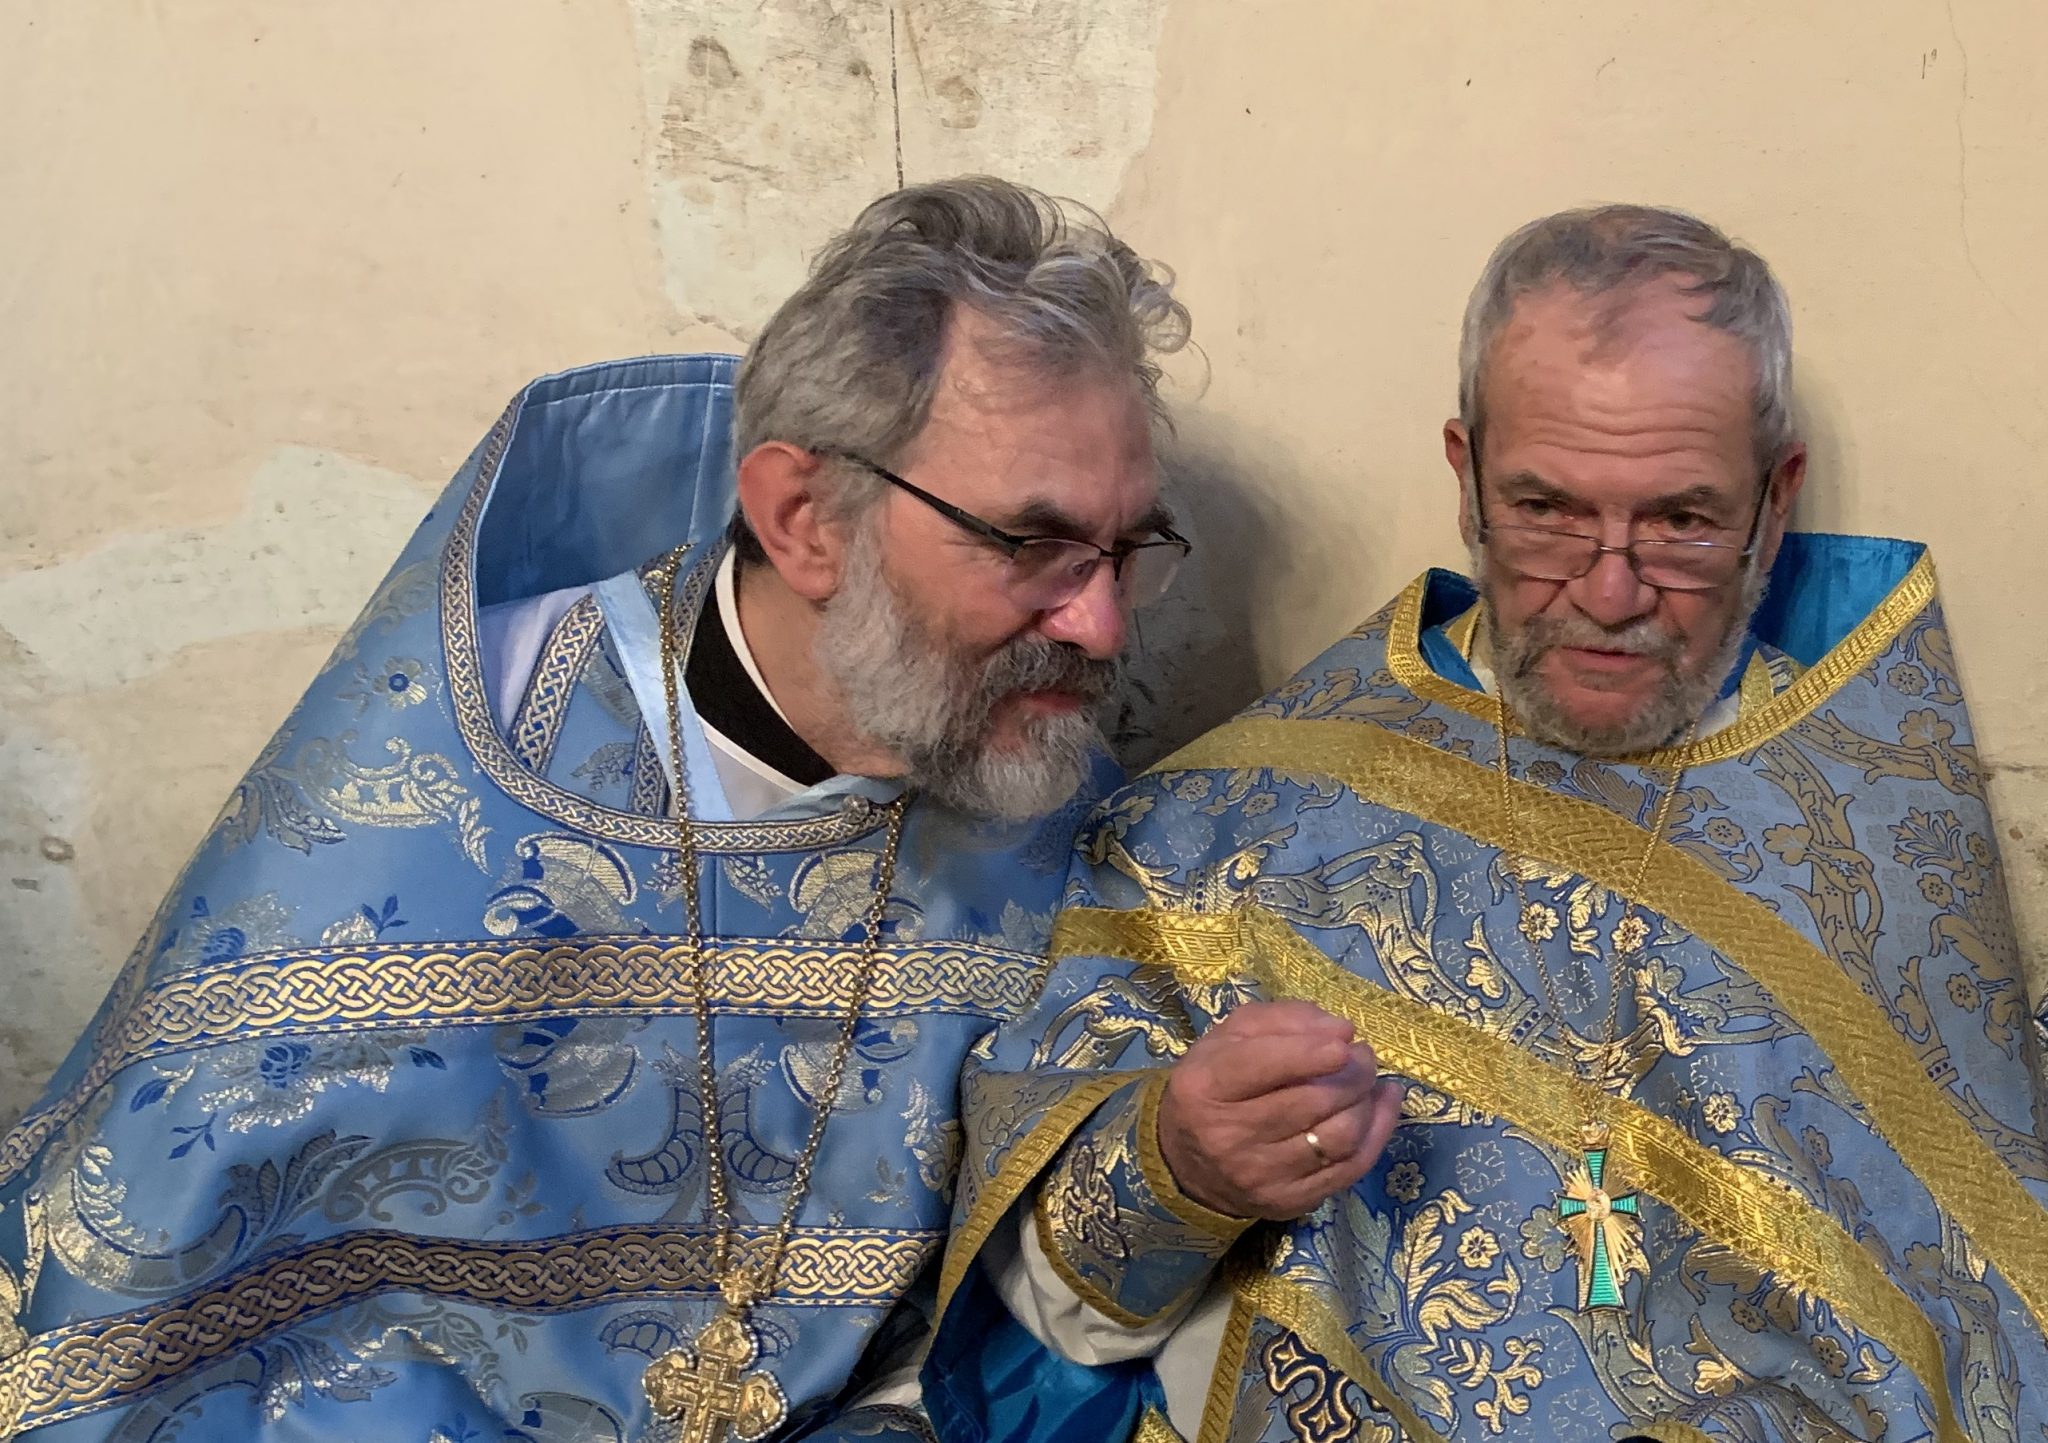 Two archpriests of the archdiocese of russian orthodox churches in western europe are appointed to the commissions of the inter-conciliar conference of the moscow patriarchate